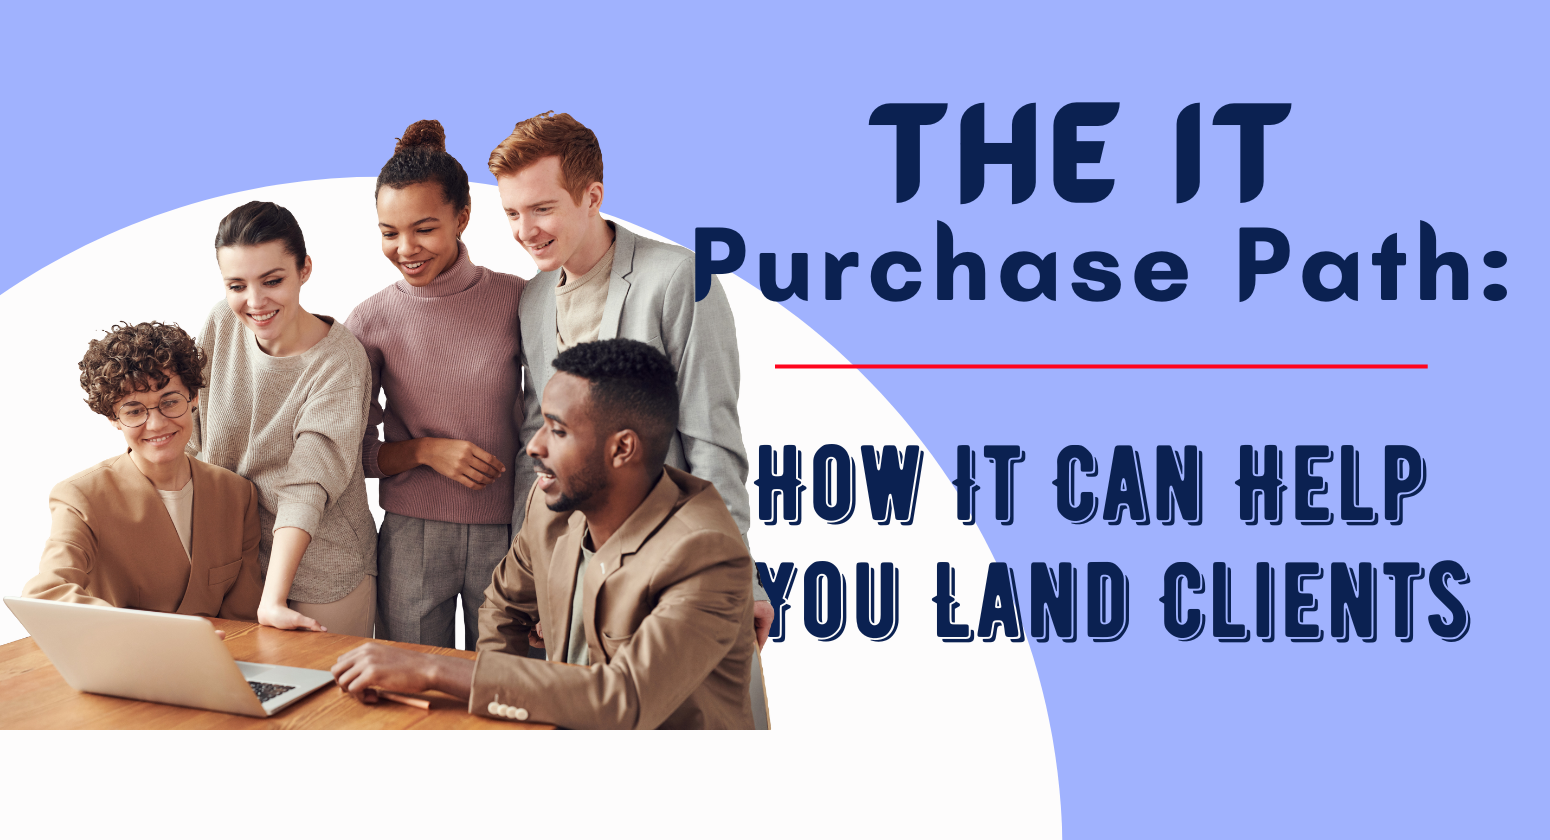 The IT Purchase Path: How It Can Help You Land Clients